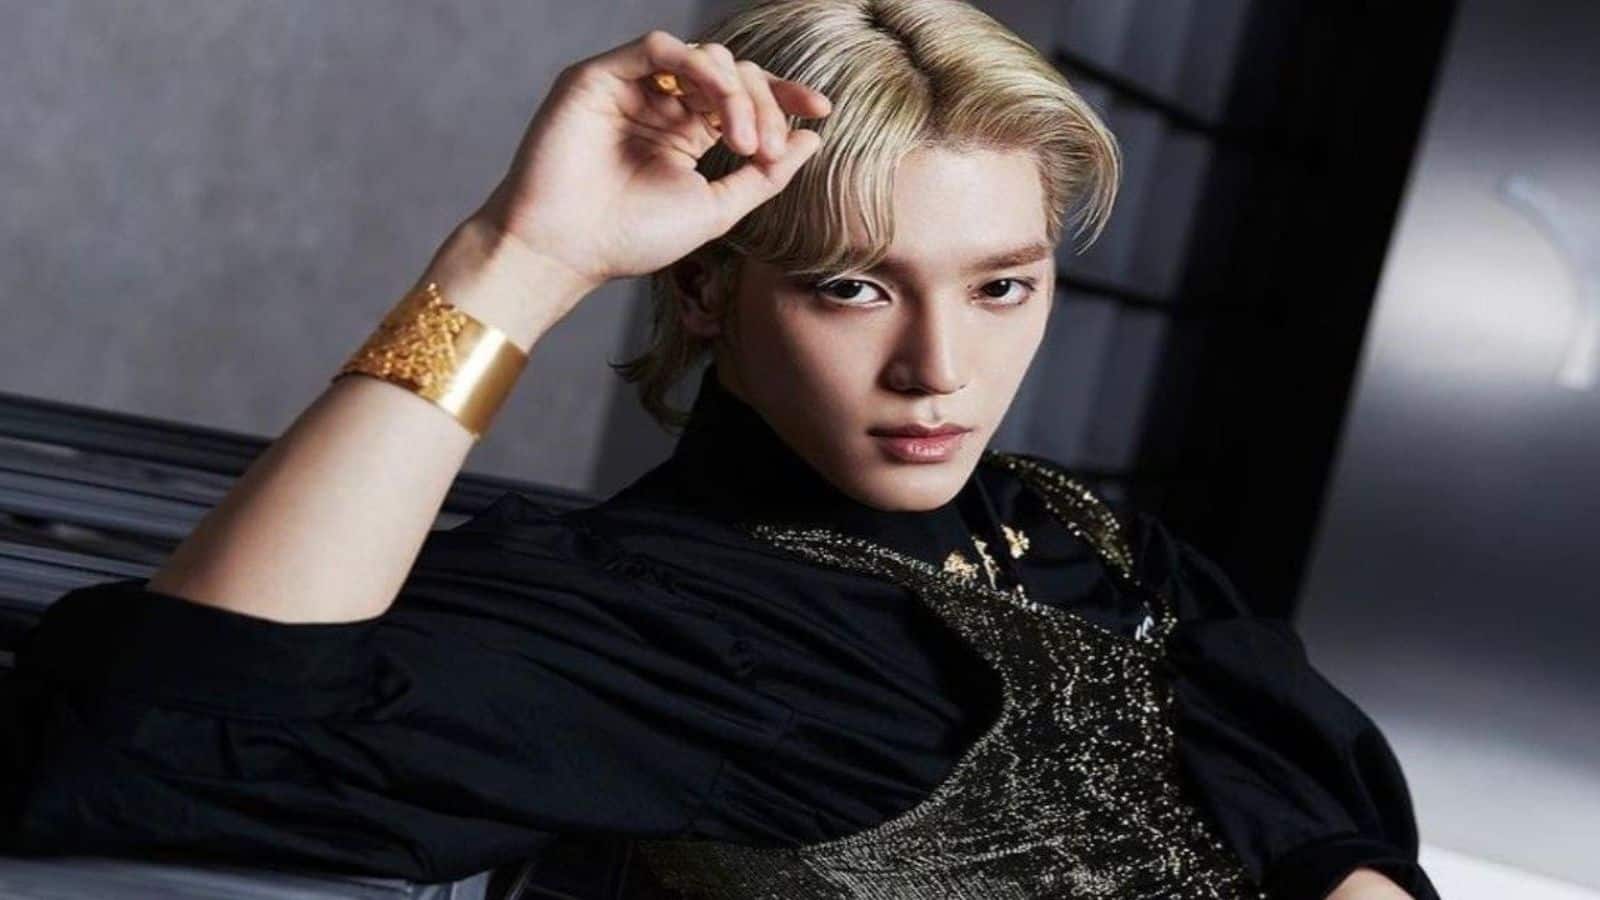 NCT's Taeyong set to commence military enlistment in April